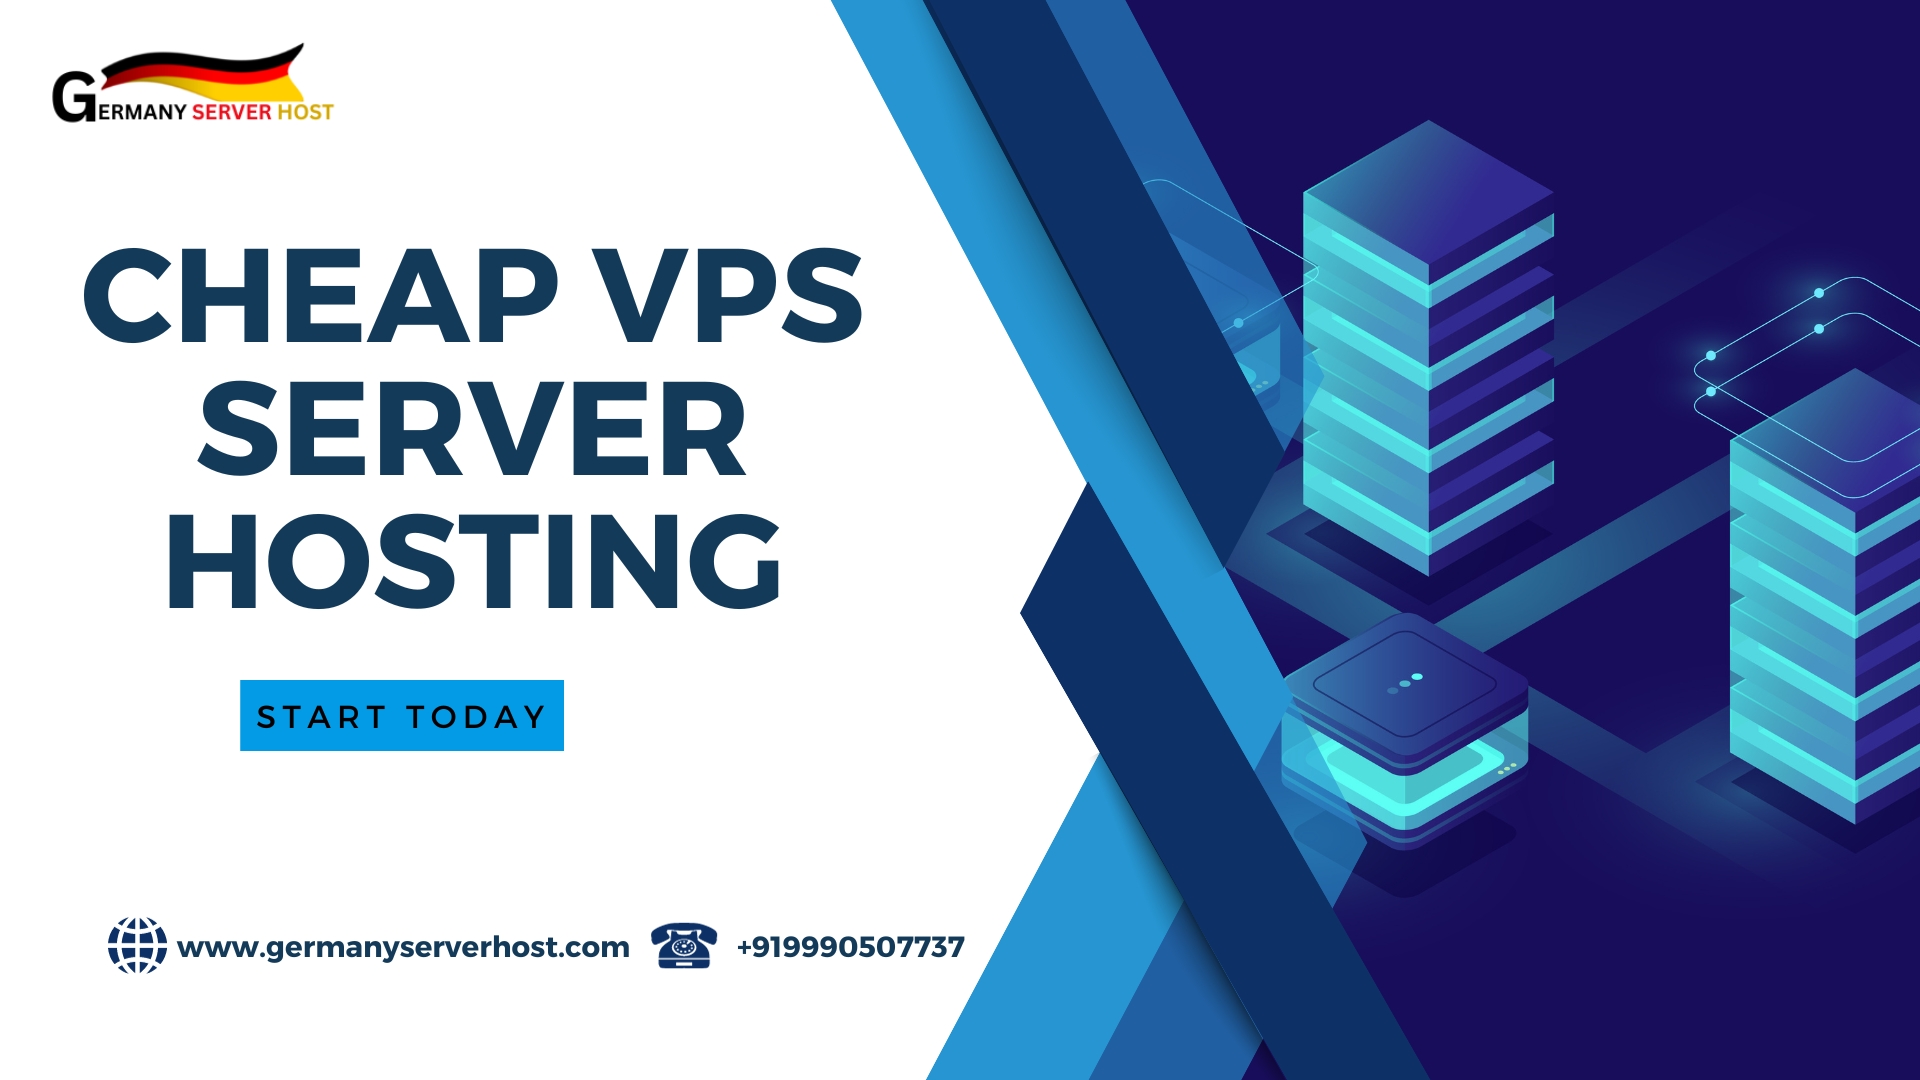 Get the Best: Cheap VPS Hosting Solutions